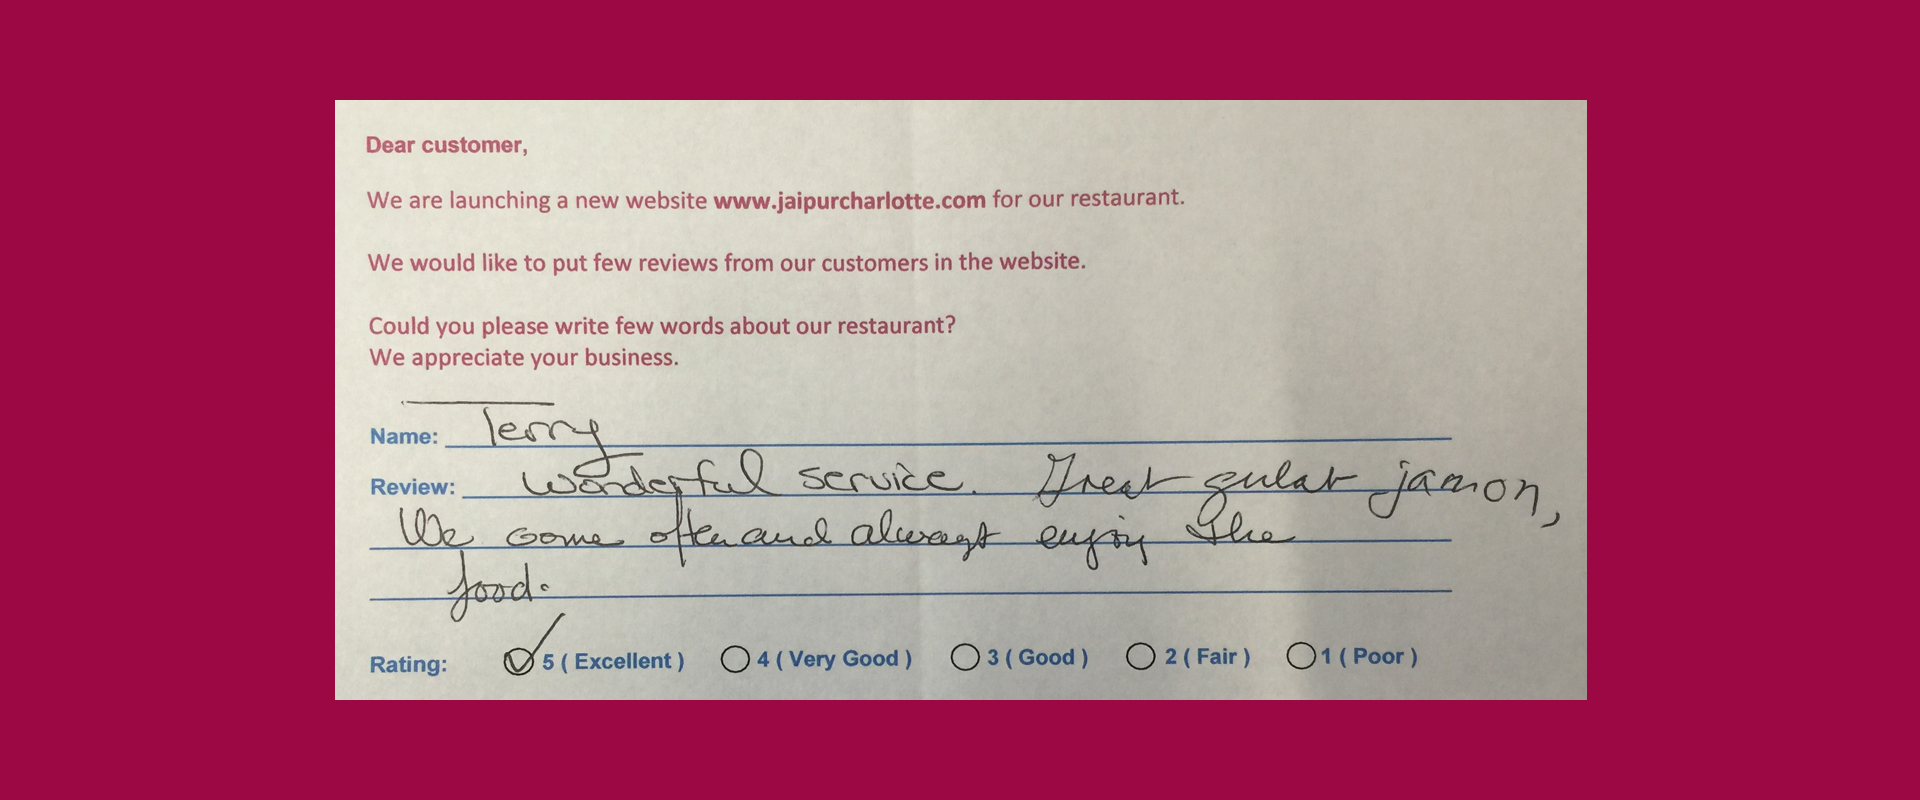 Jaipur Indian Restaurant Customer Review by Terry - Rating 5 out of 5